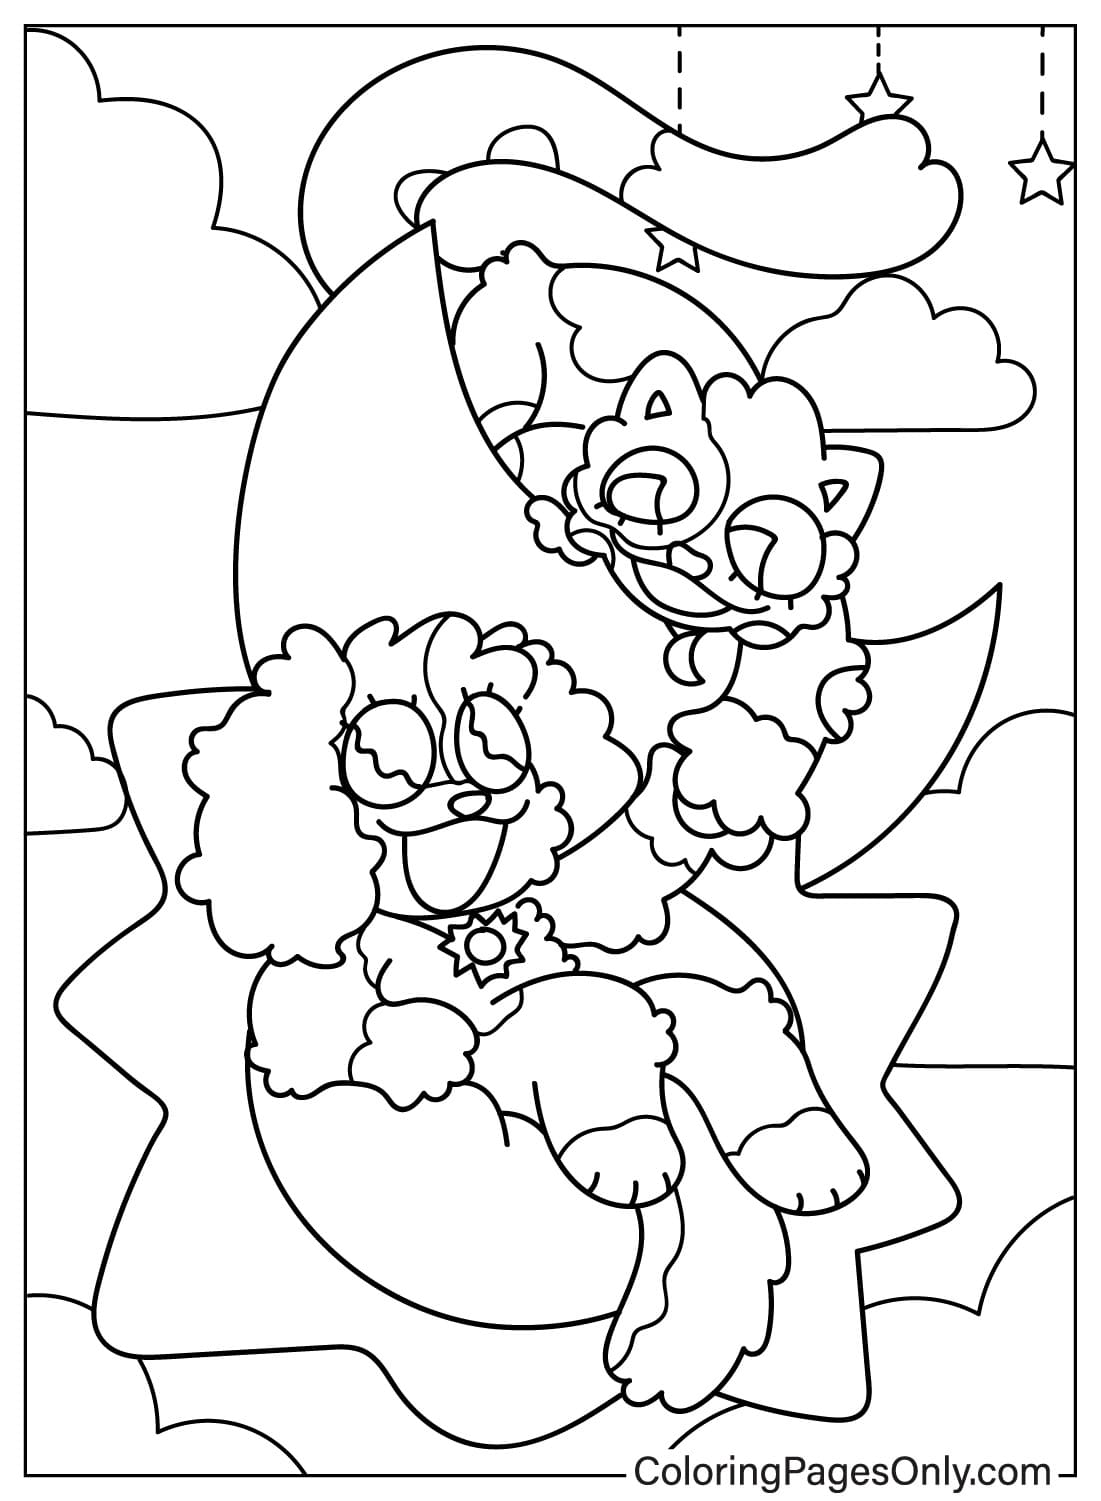 Drawing Catnap and DogDay Coloring Page from DogDay